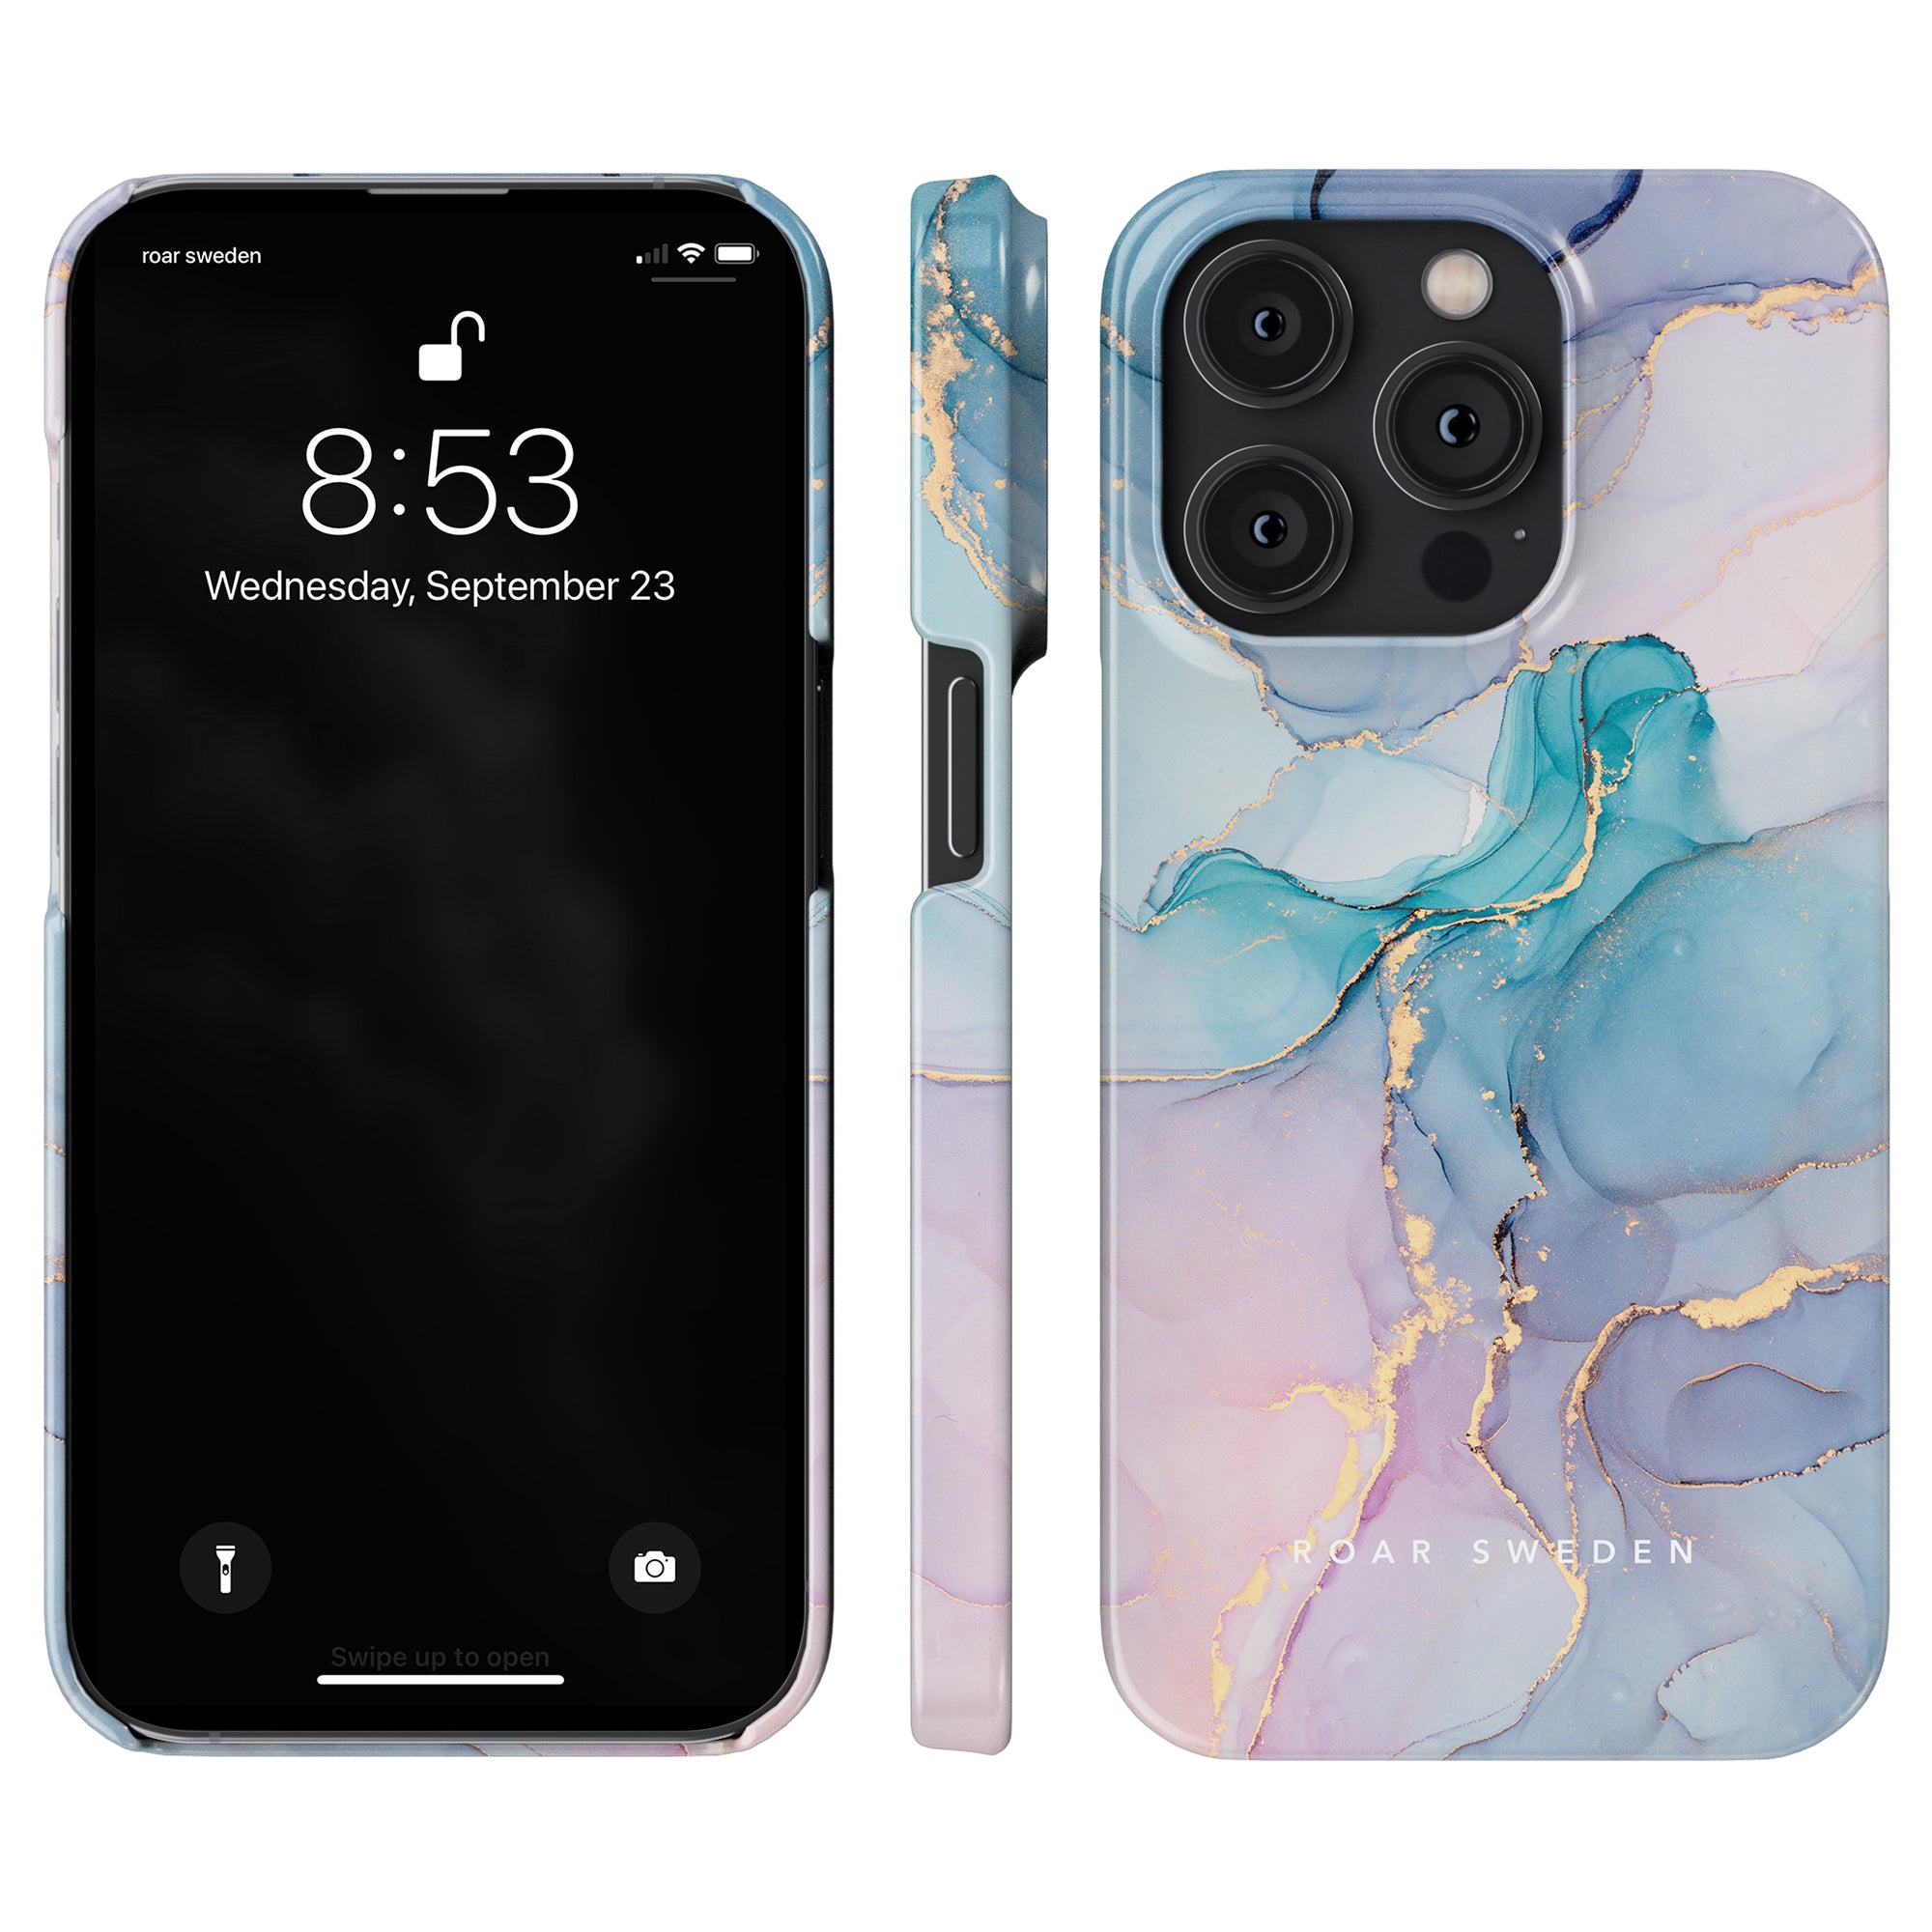 A blue marble Swirl - Slim case for the iPhone 11 pro, providing swirl-skalet design and reliable skydd.